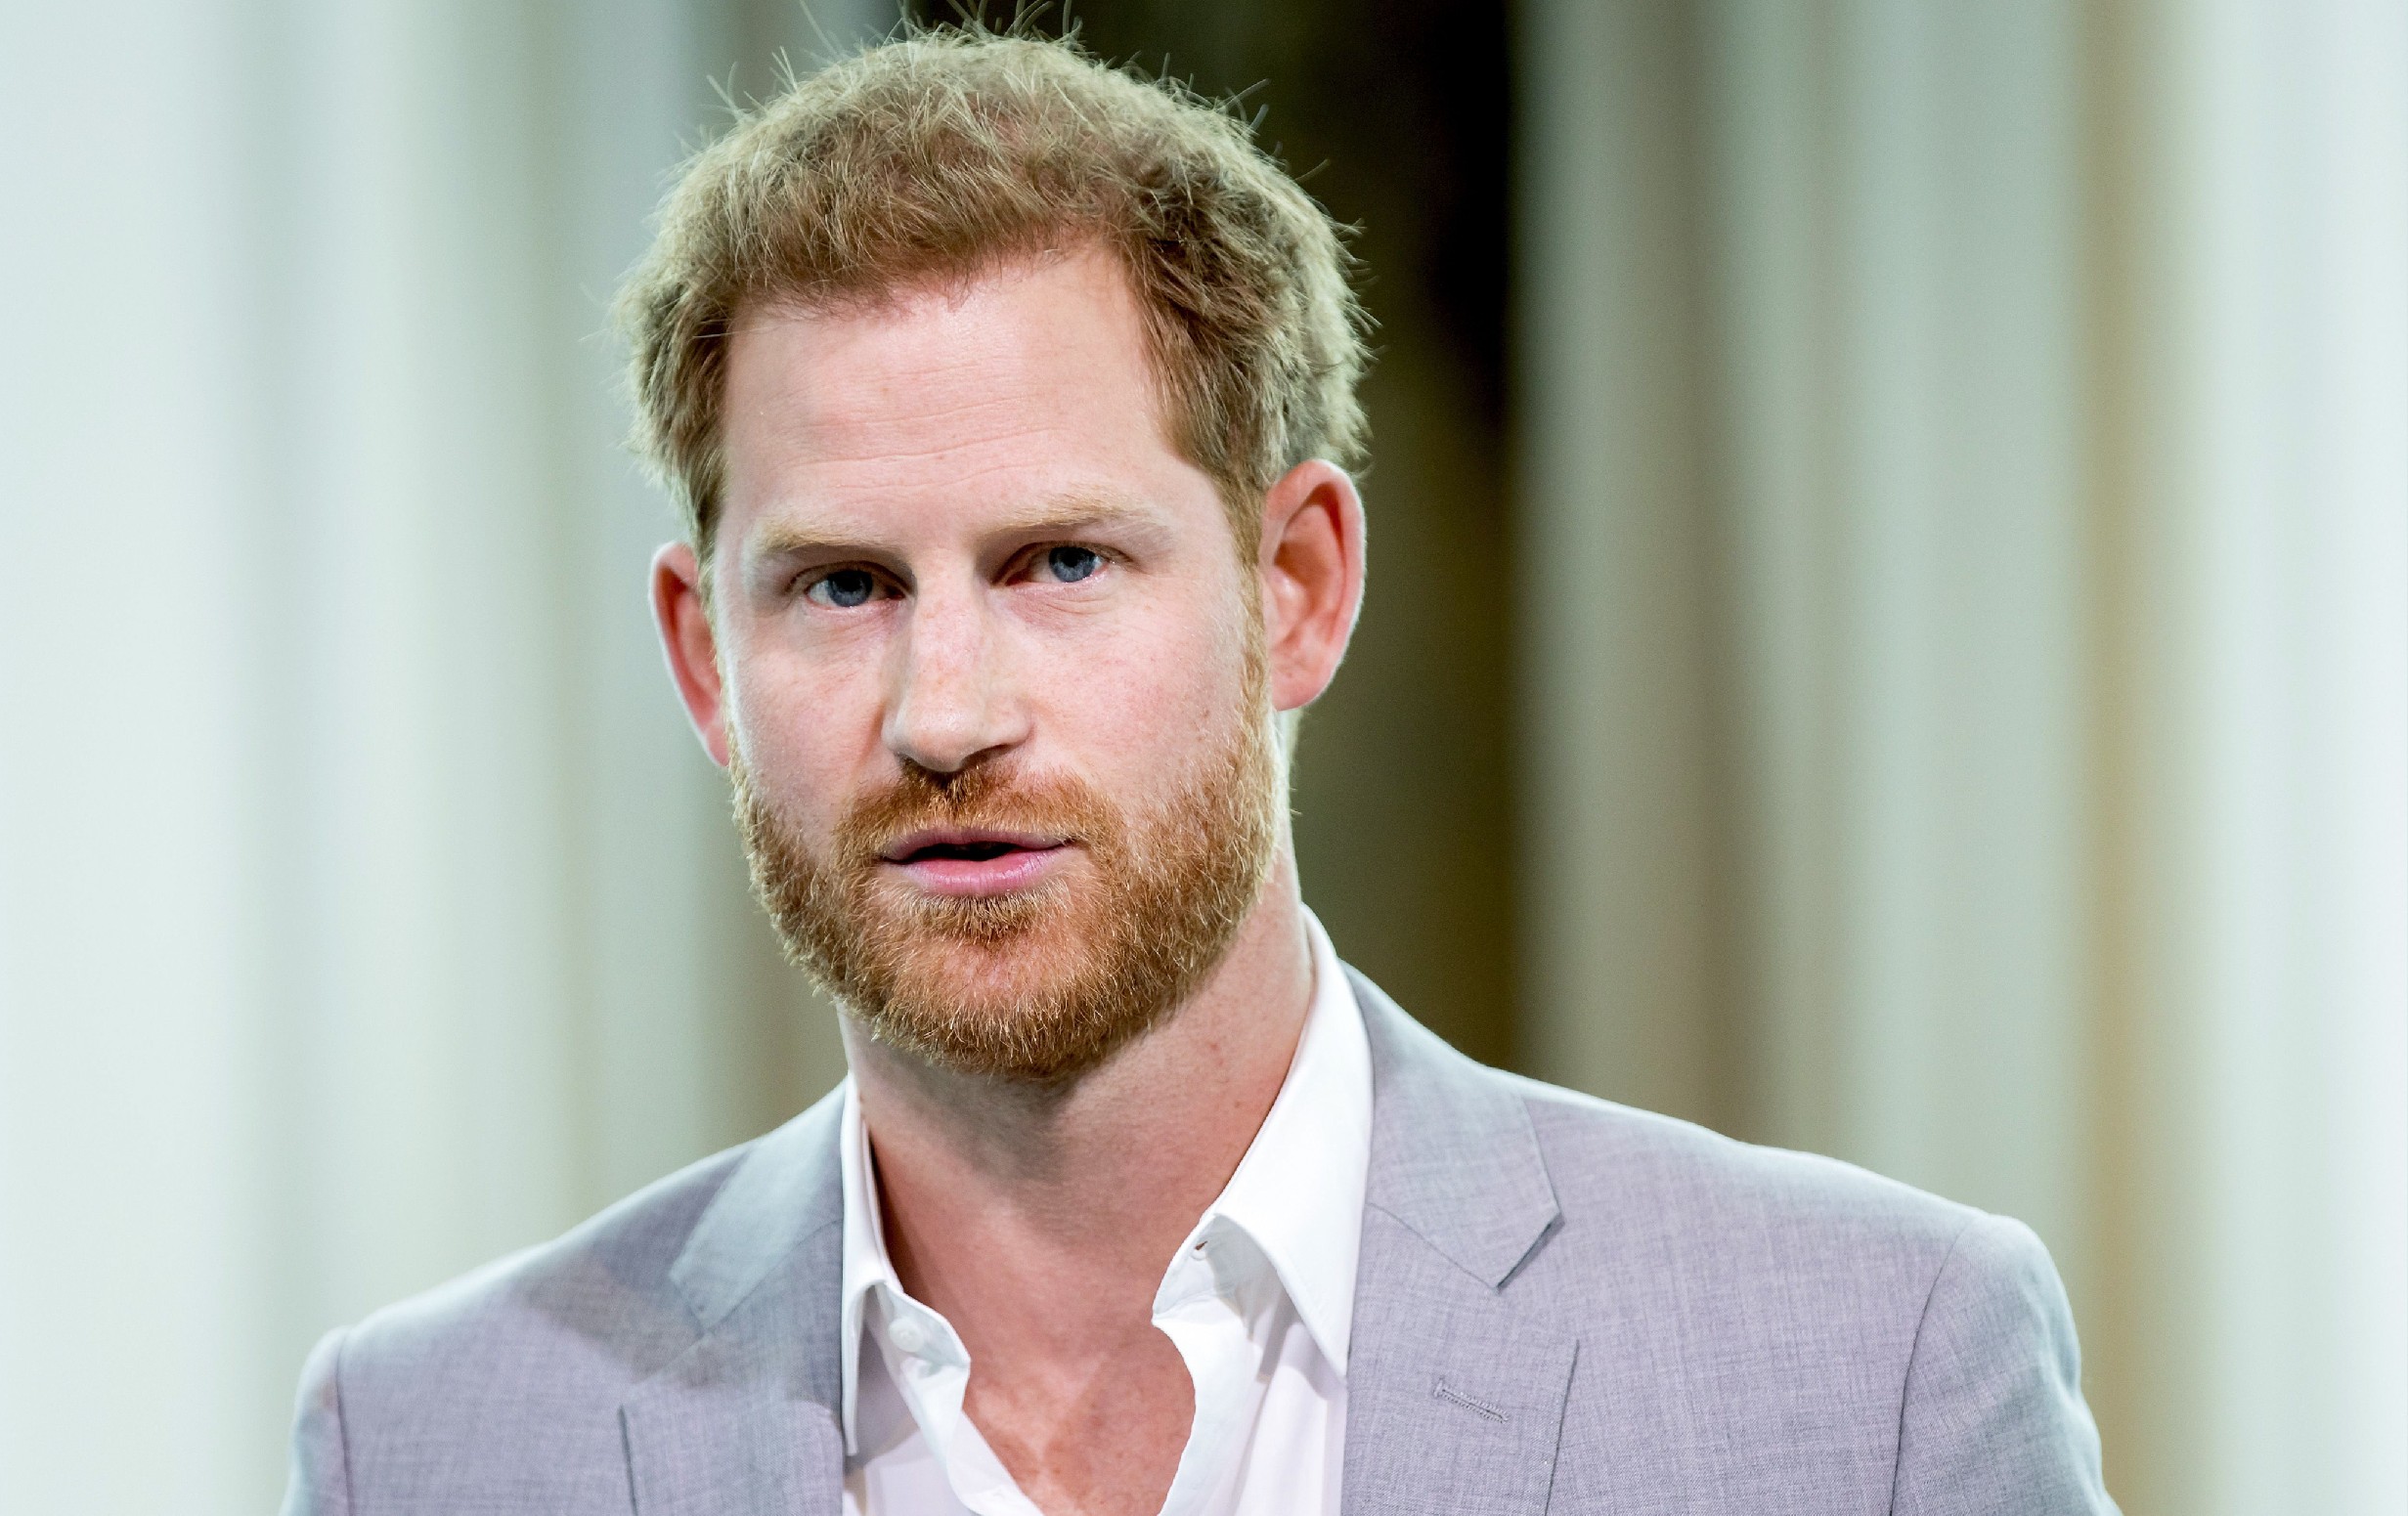 Prince Harry Allegedly Begging To Rejoin Royal Family, Asking Charles For Forgiveness, Royal Gossip Says